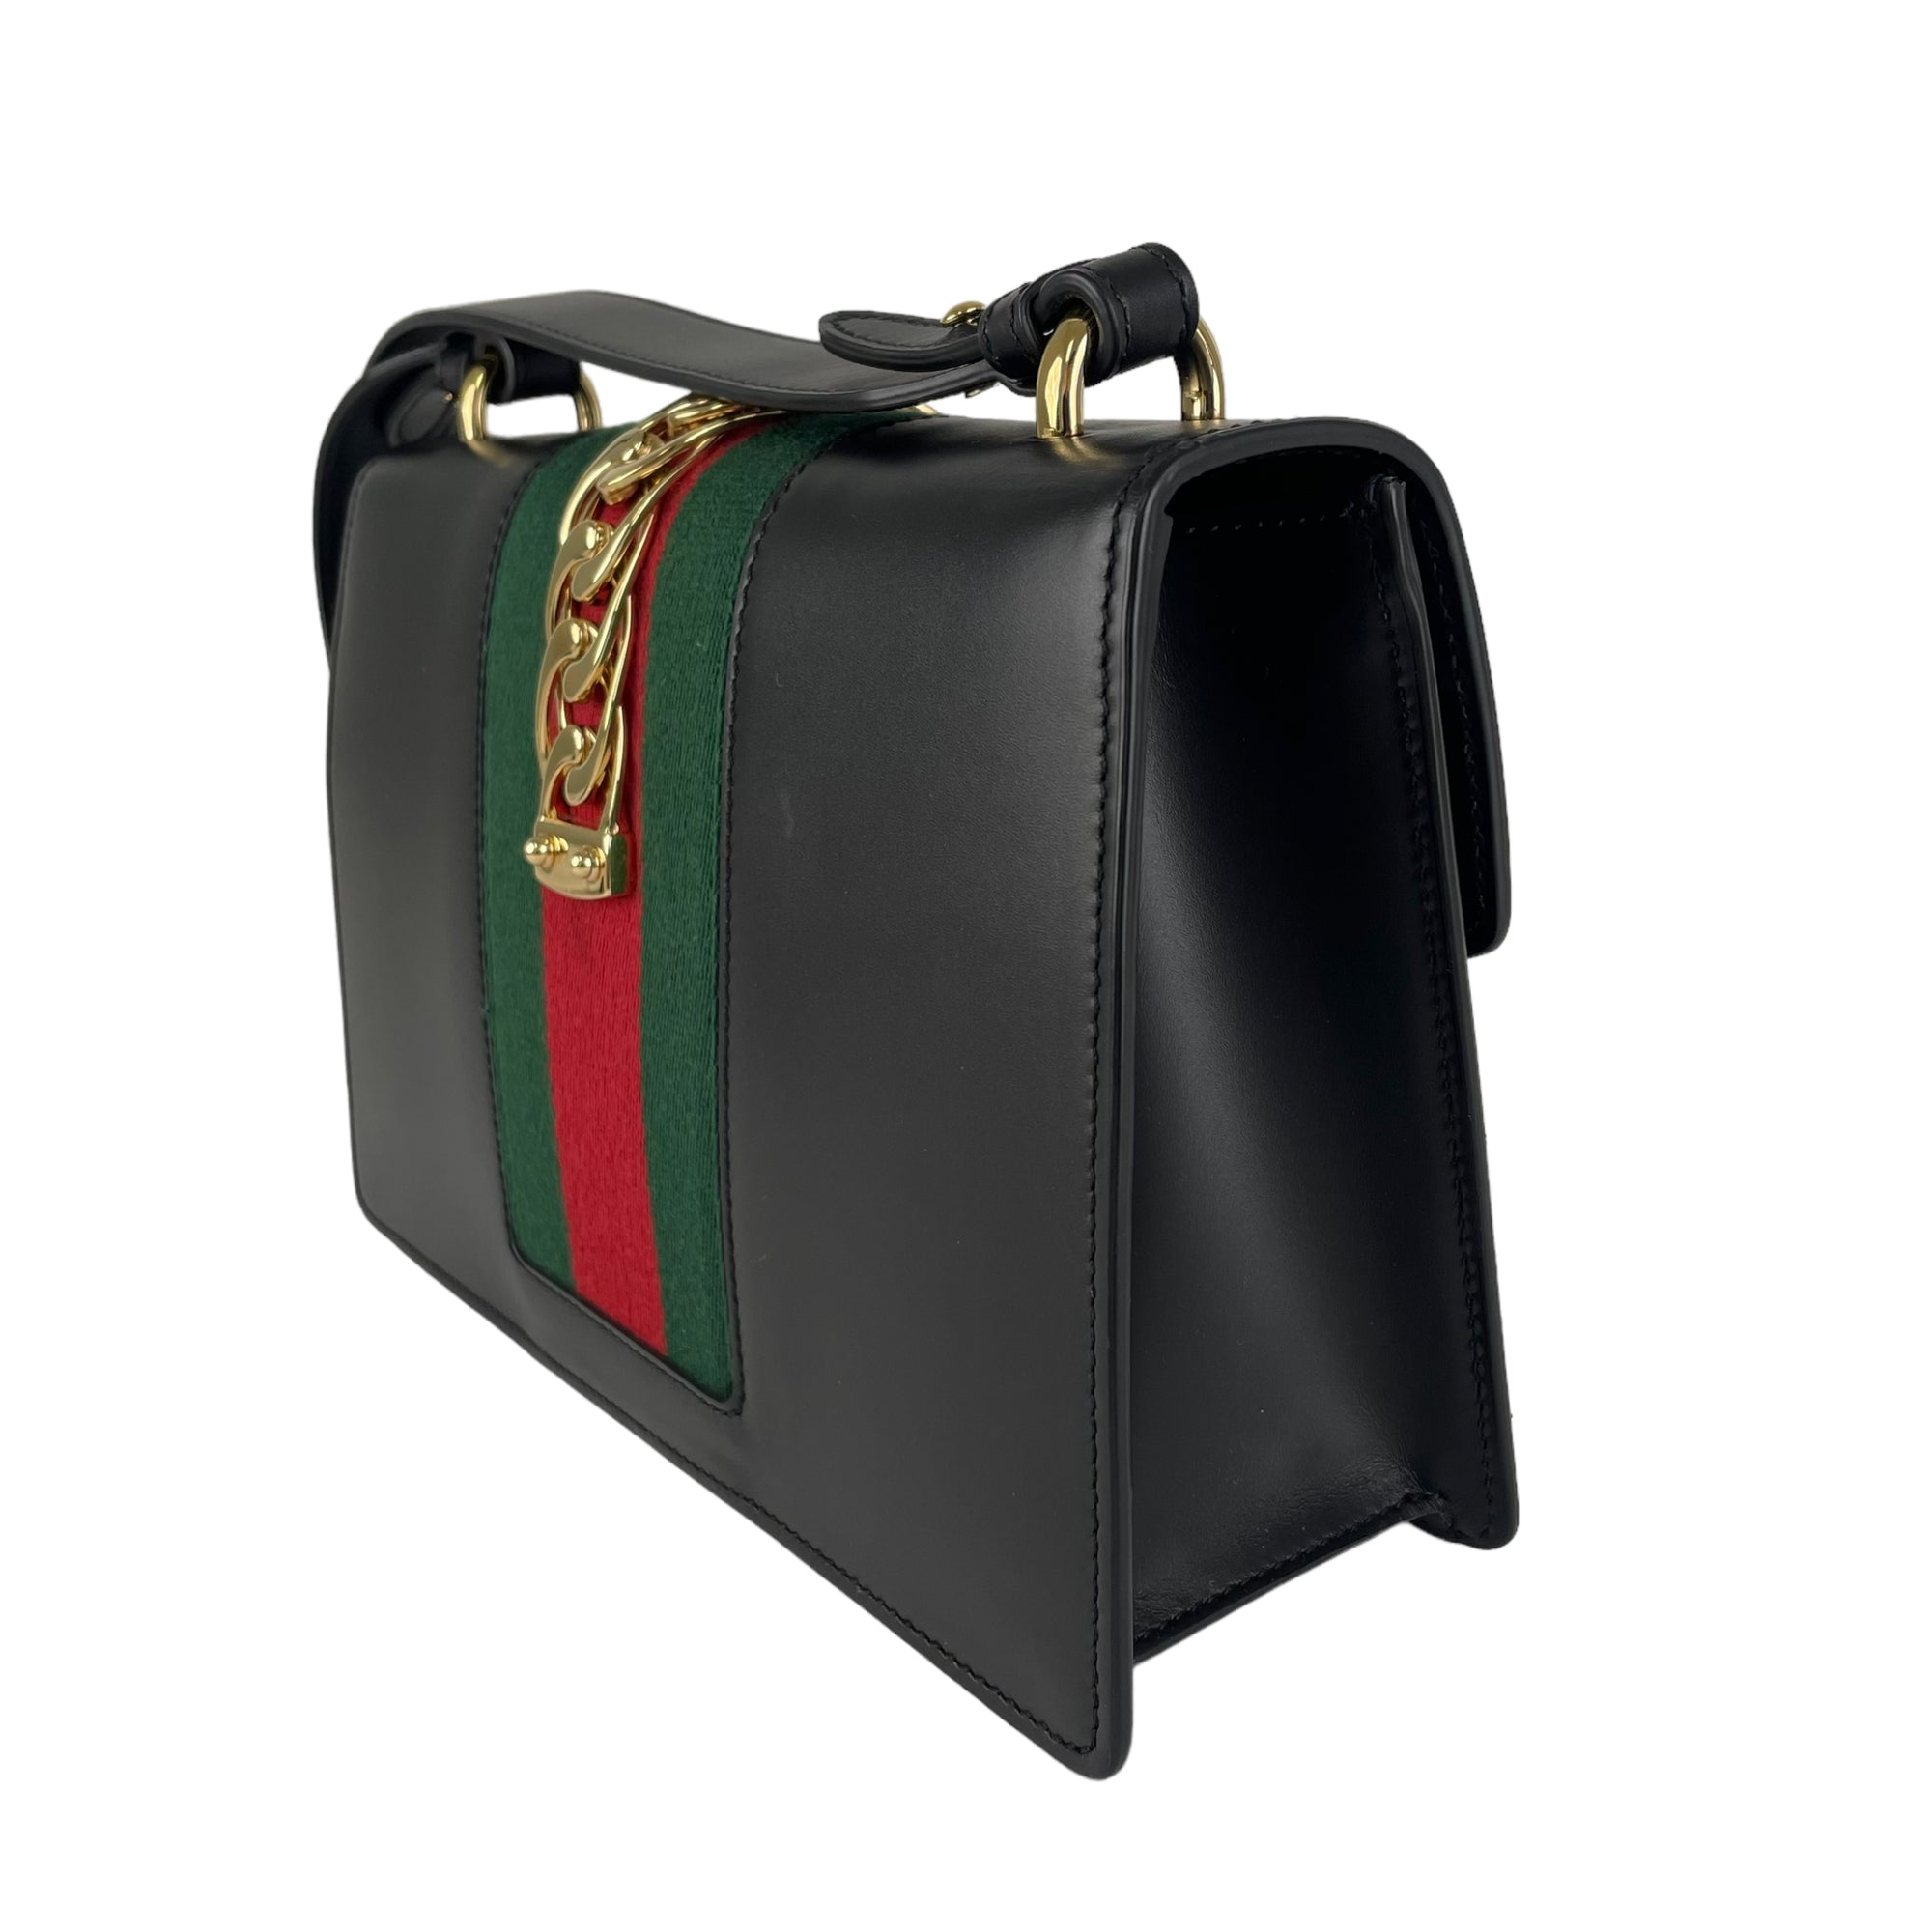 Love the Gucci Sylvie bag but can't afford the £2000 price tag? We